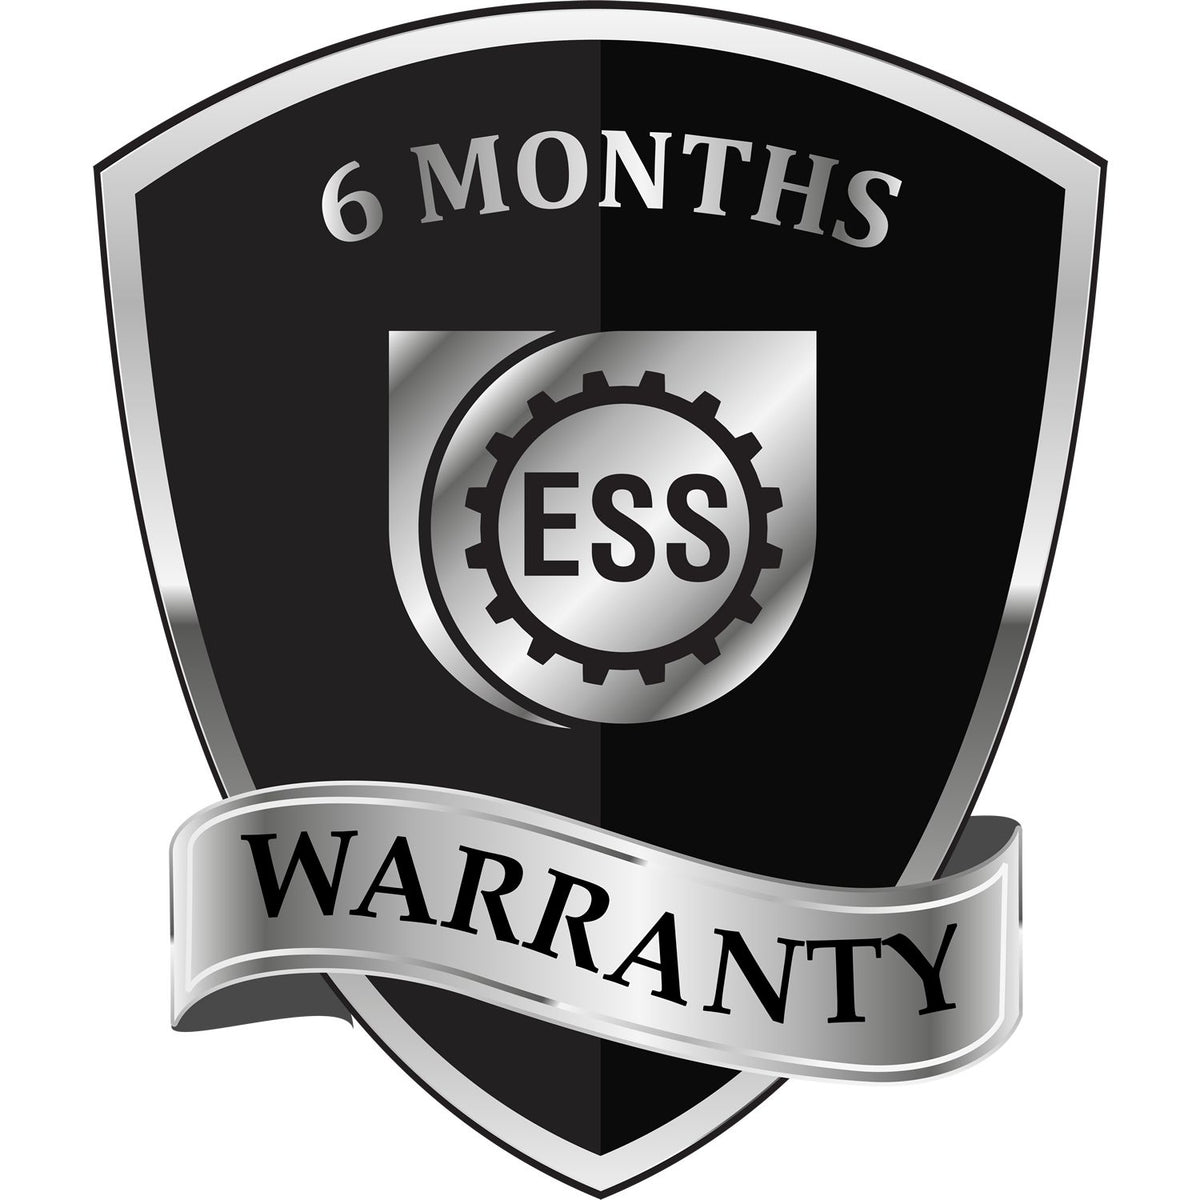 A badge or emblem showing a warranty icon for the Rhode Island Professional Engineer Seal Stamp